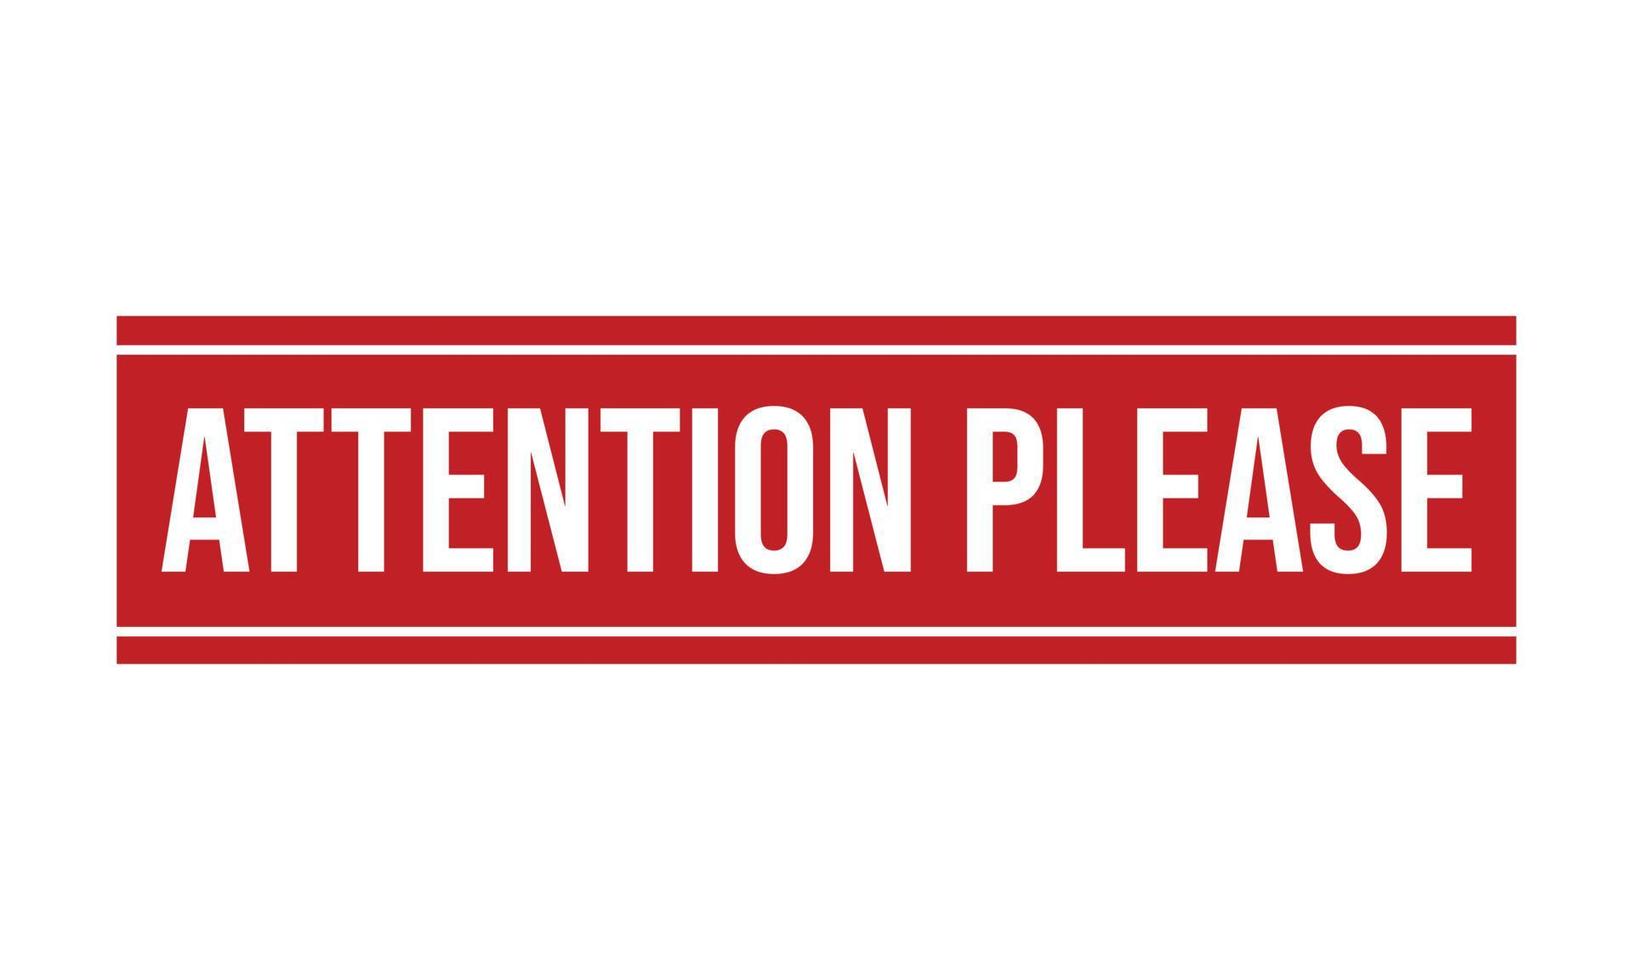 Attention Please Rubber Grunge Stamp Seal Vector Illustration